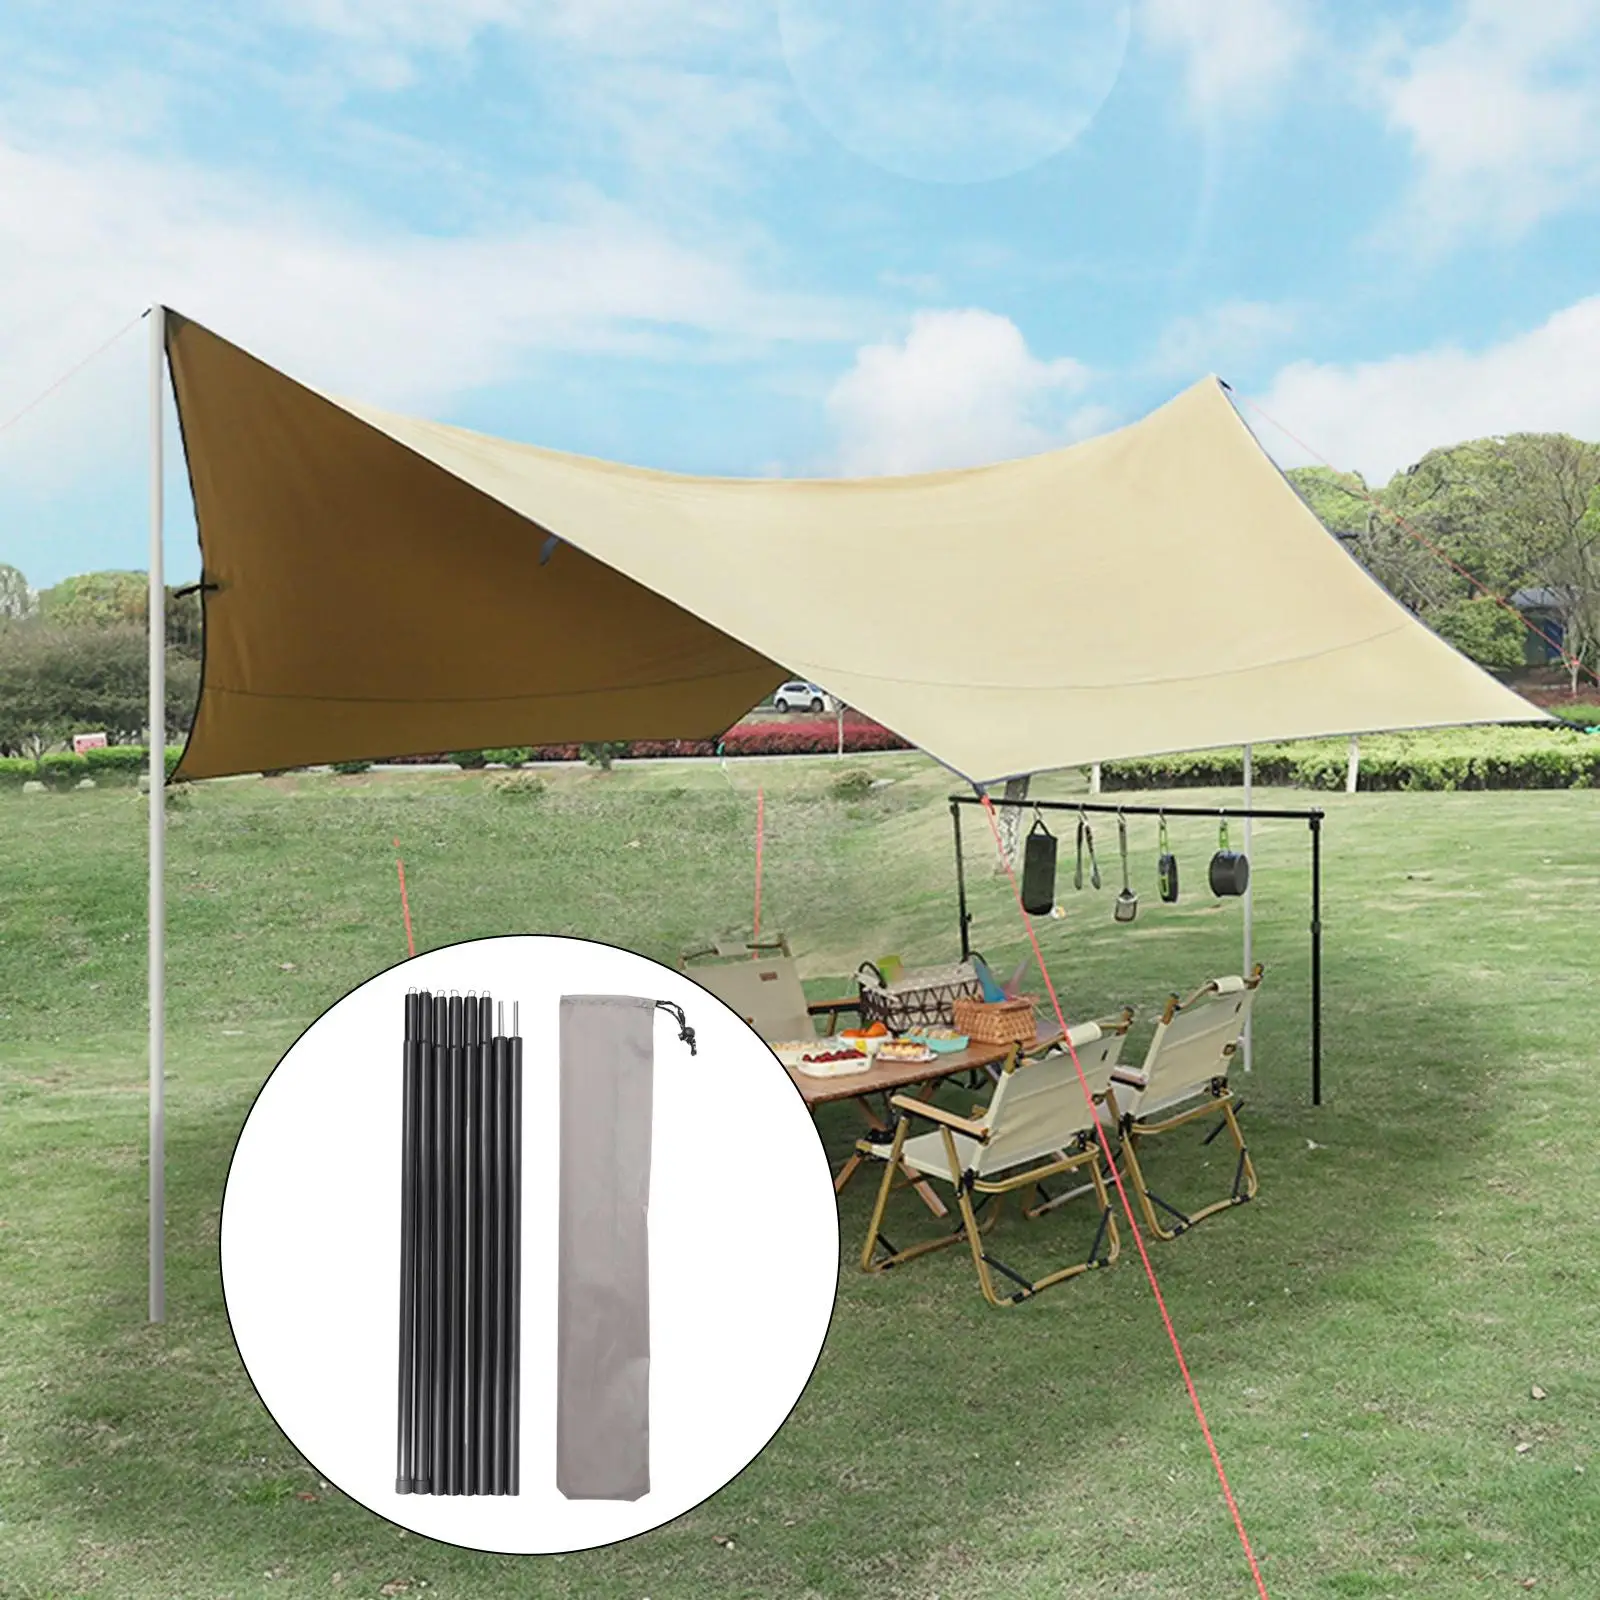 Tent Awning Pole Folding Iron Tube Canopy Rod For Outdoor Camping Hiking Travel Sunshade Tarp Accessories